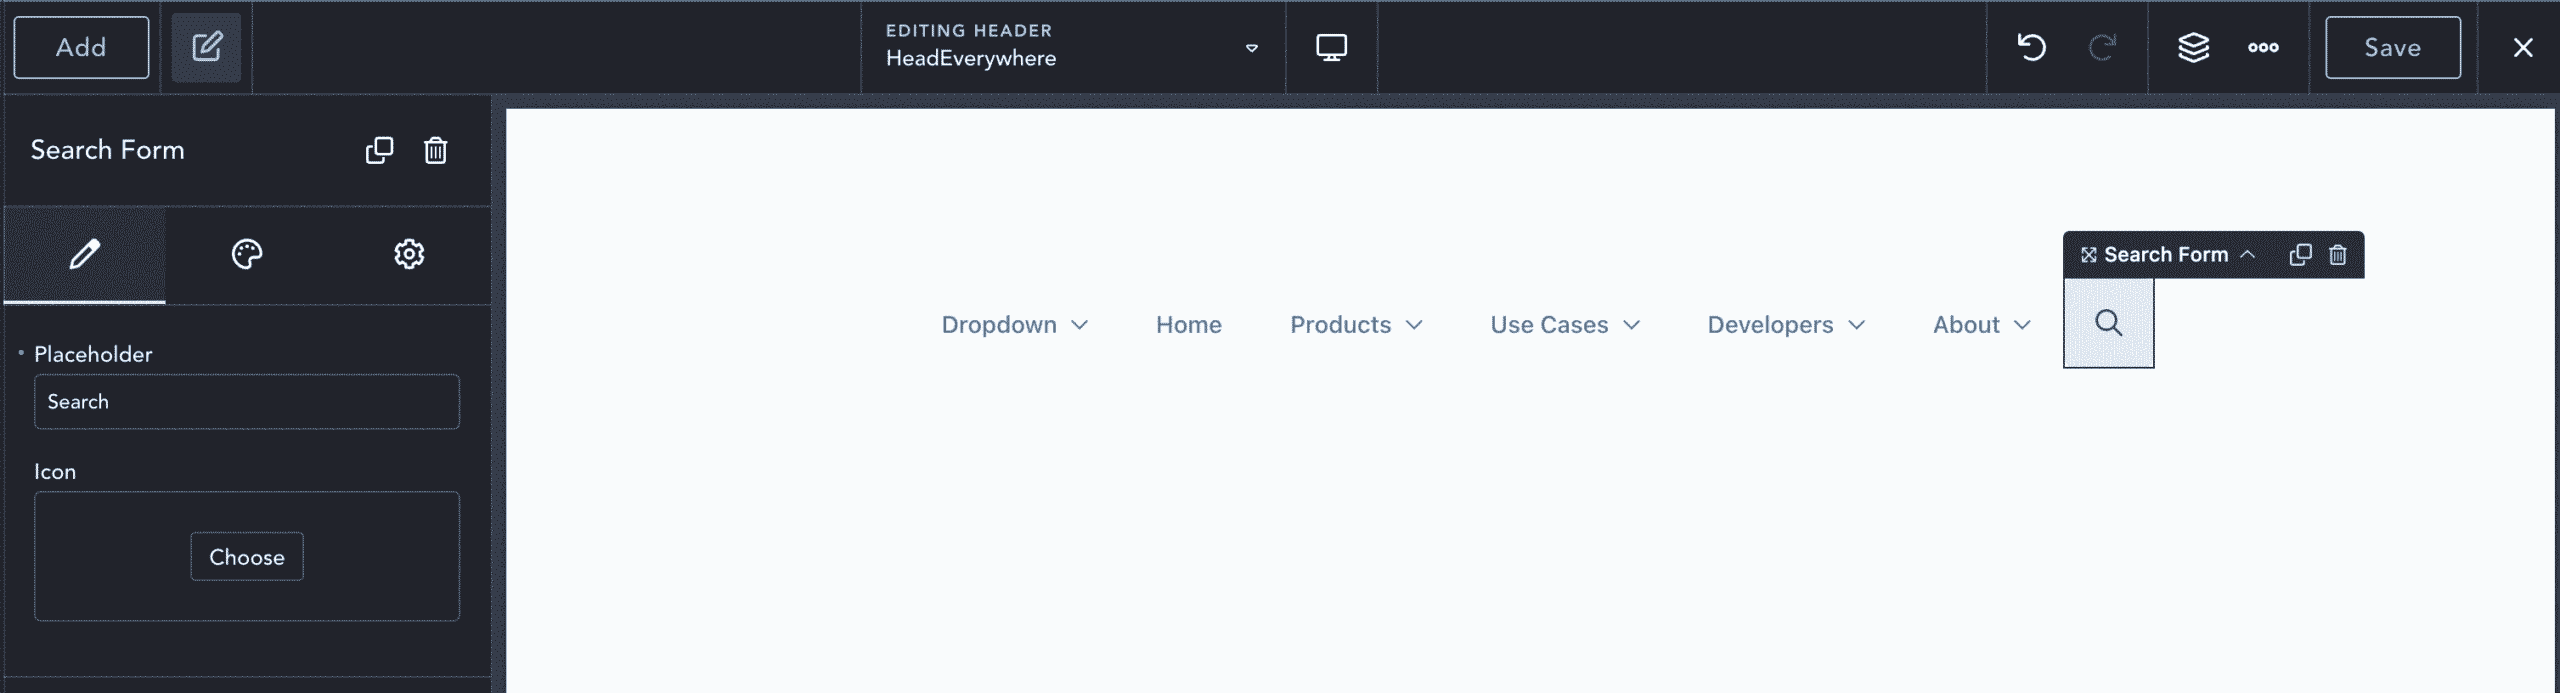 added search form to breakdance builder header